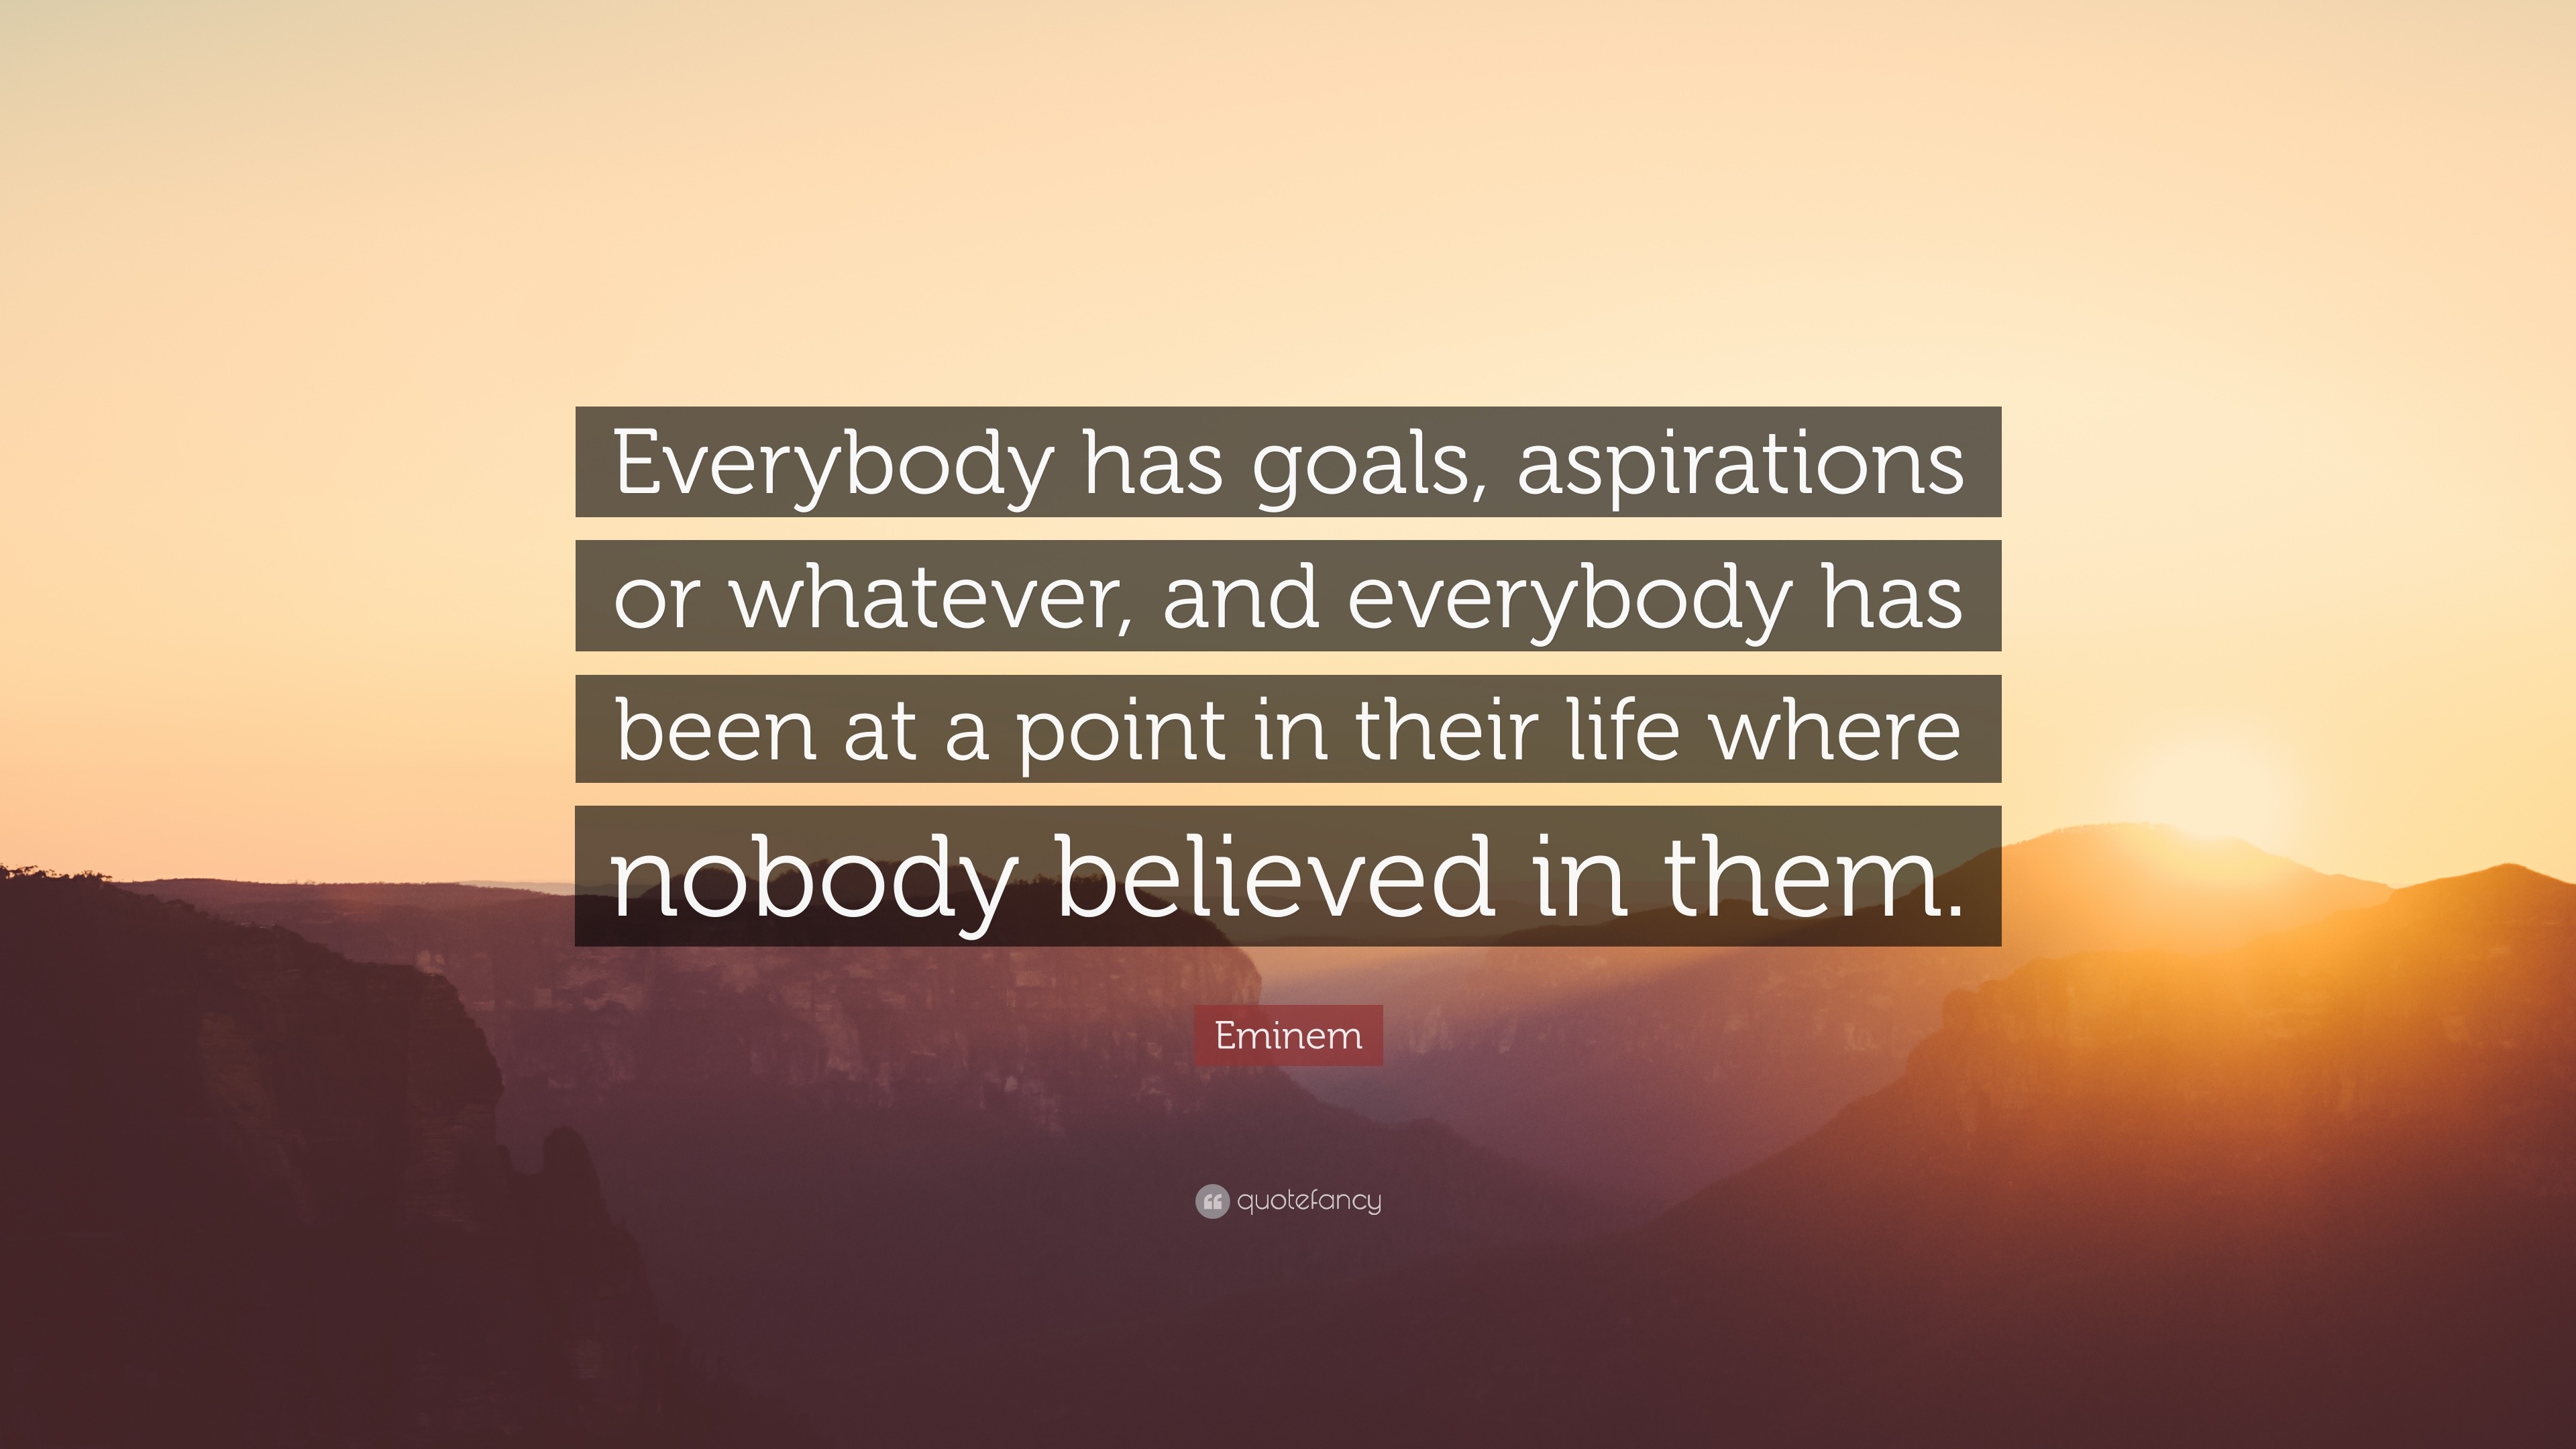 Eminem Quote “Everybody has goals aspirations or whatever and everybody has been